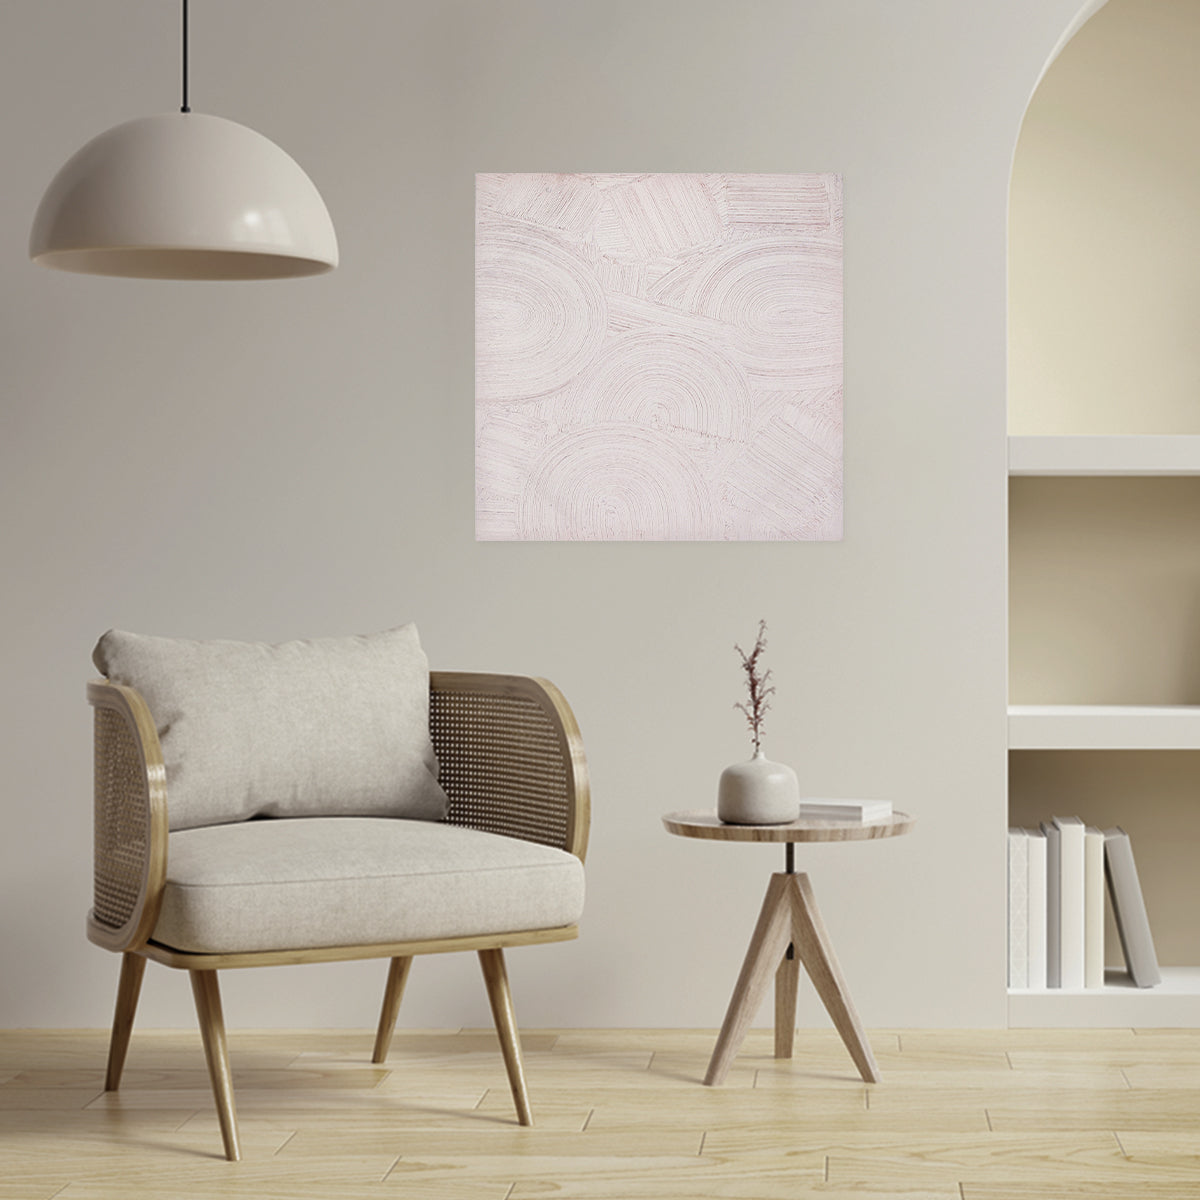 Abstract textured wall art affordable oil painting unframed white zen square in living room